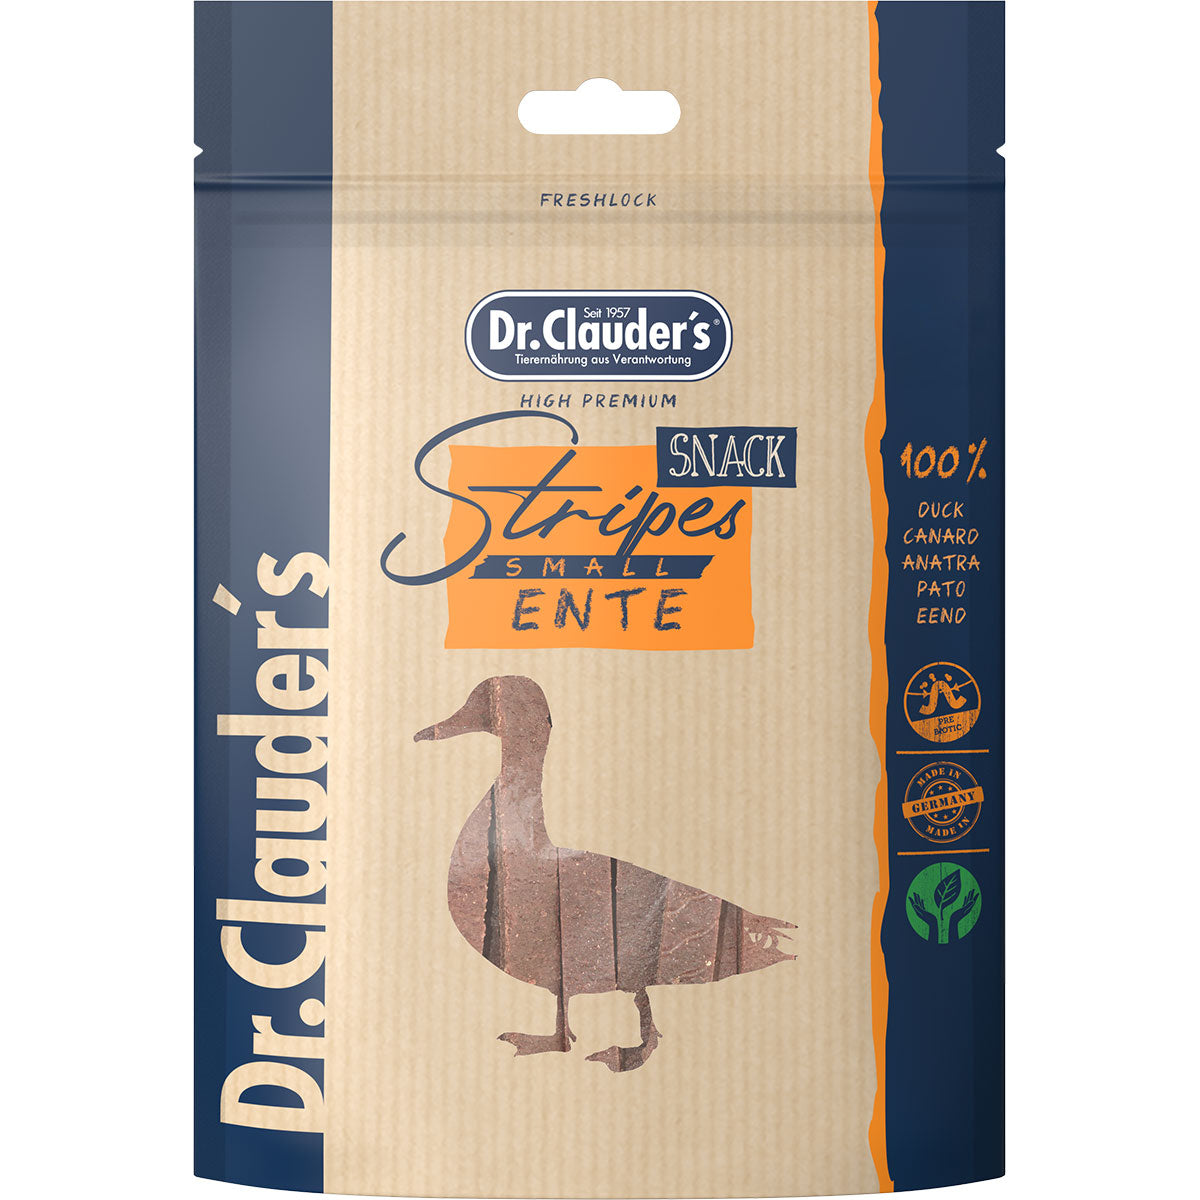 Dr. Clauders Snack Stripes Small Ente, 80g